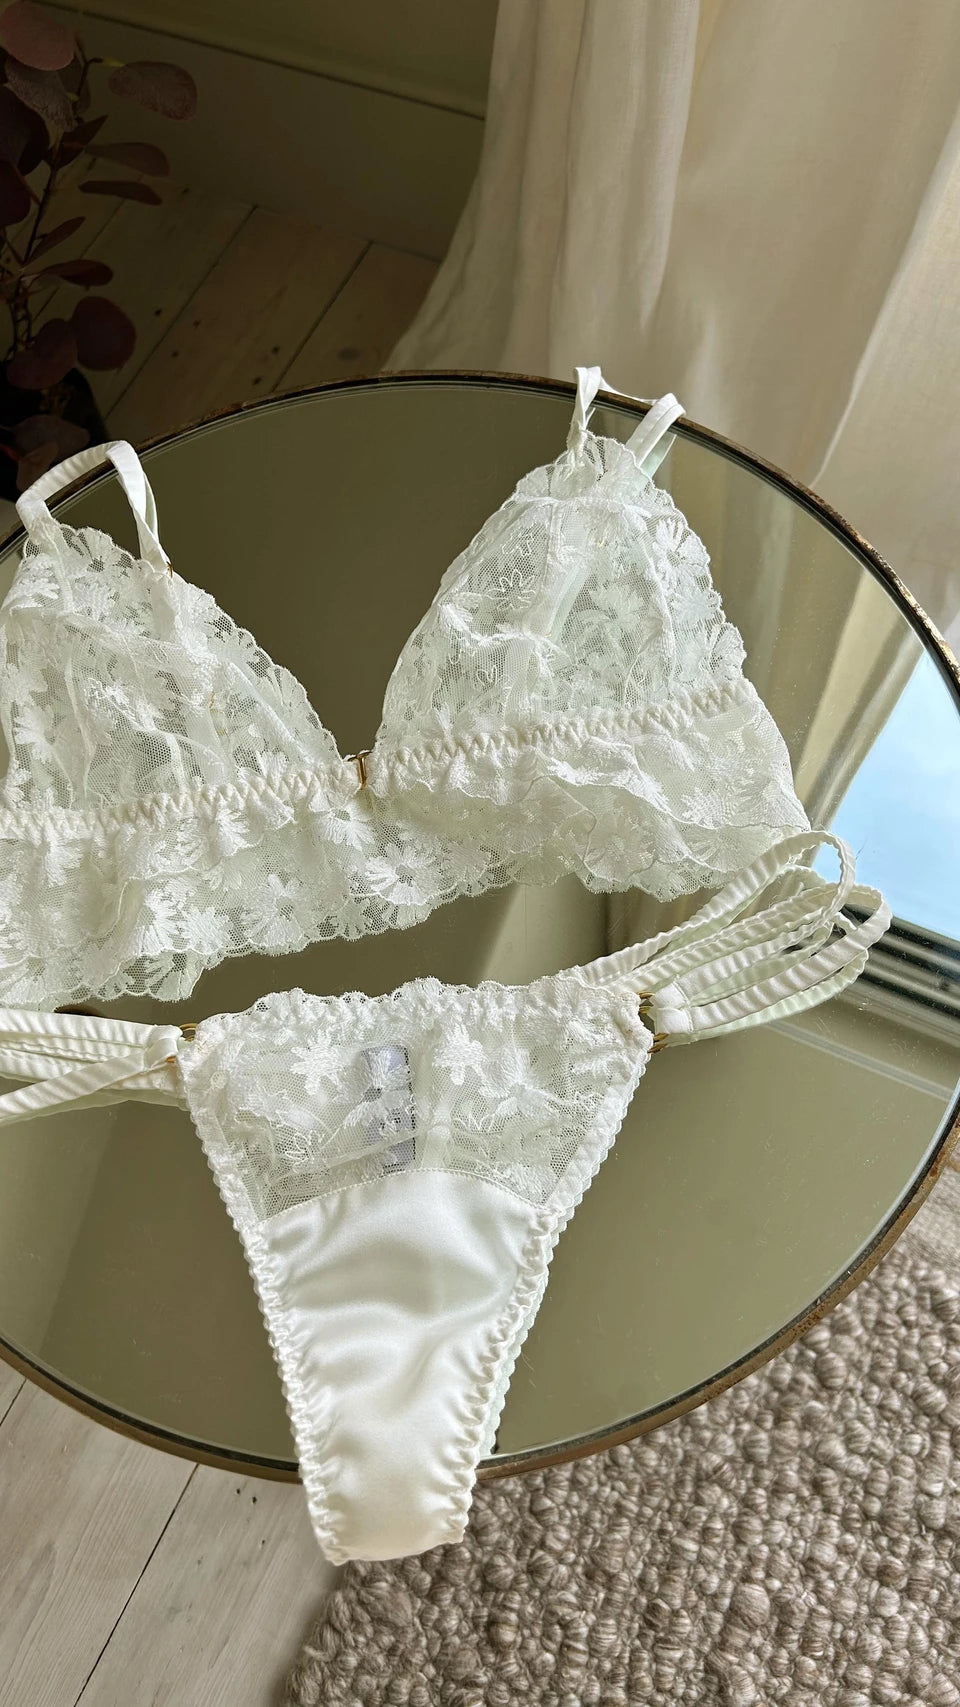 Sheer White Lace Wireless Bra and Panty Set, white, lace, top, bra